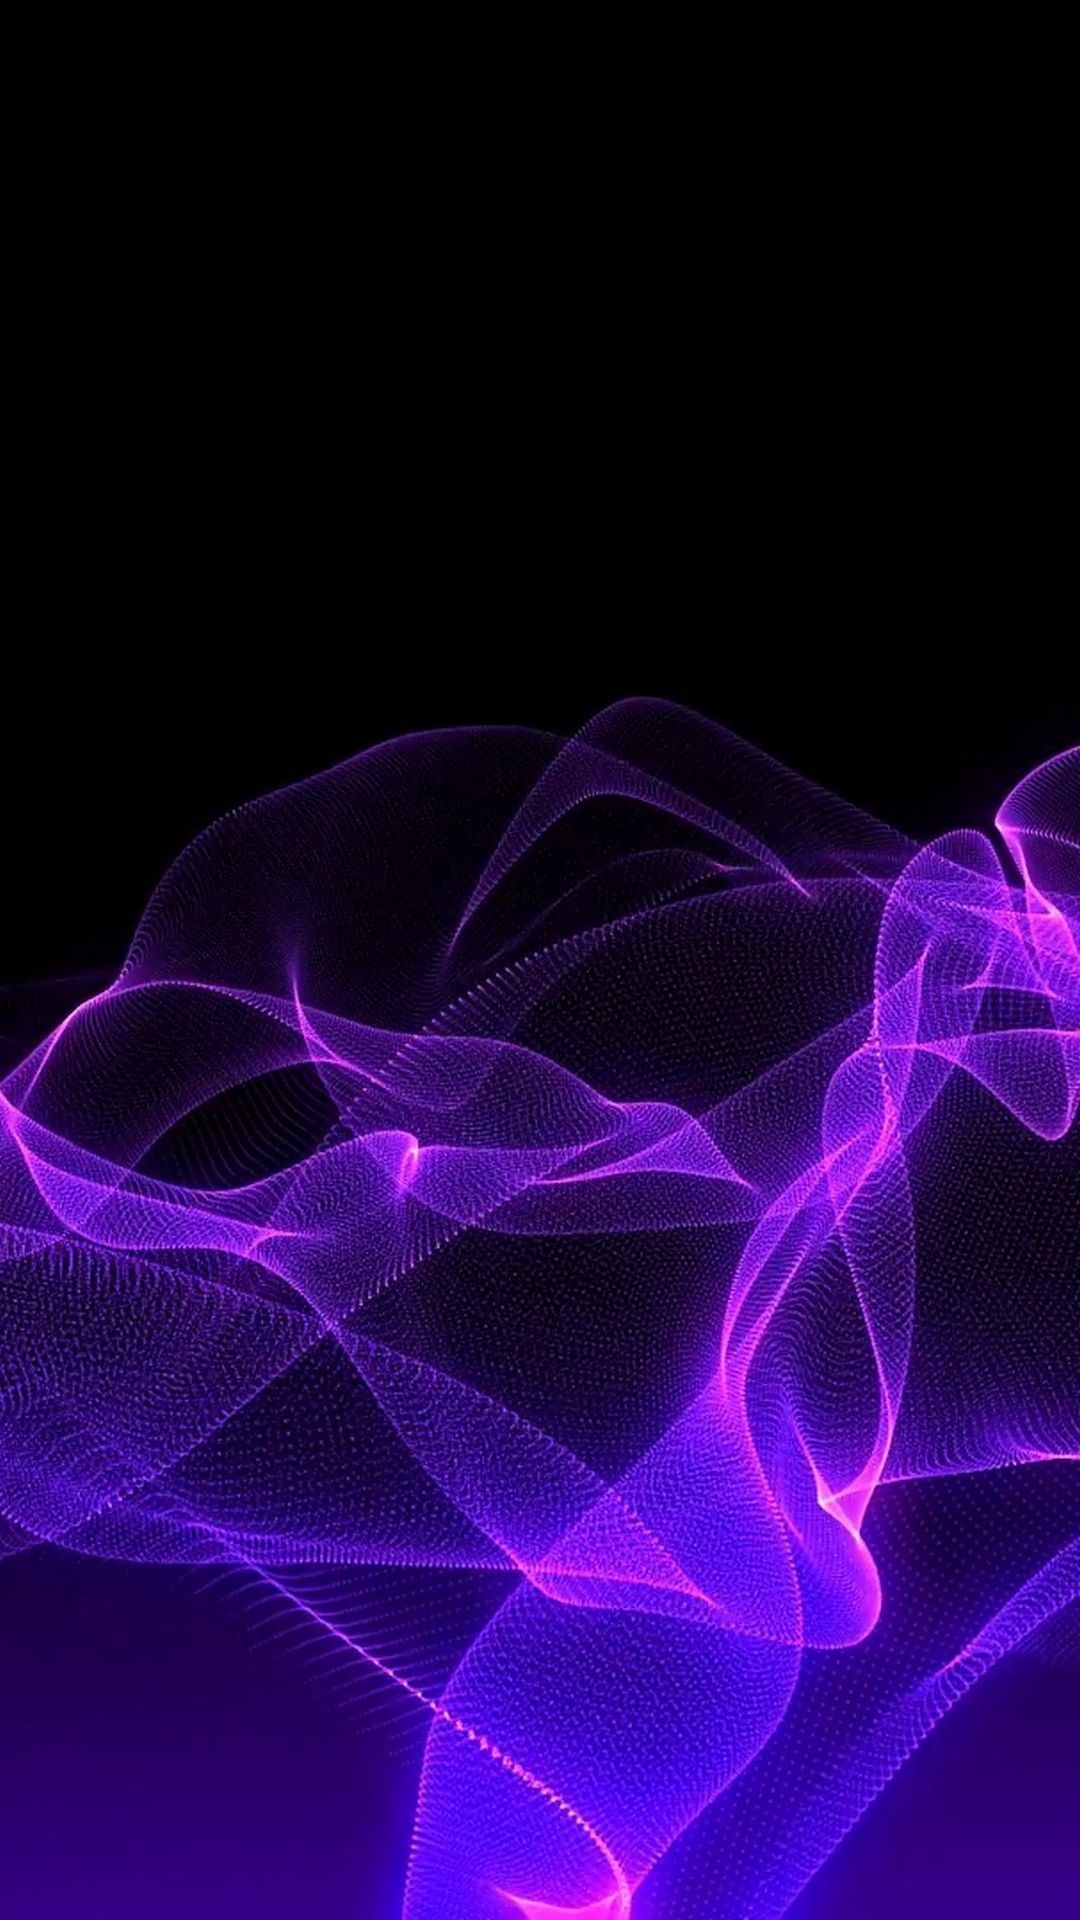 Aesthetic Purple And Green Wallpapers Ios in 2020